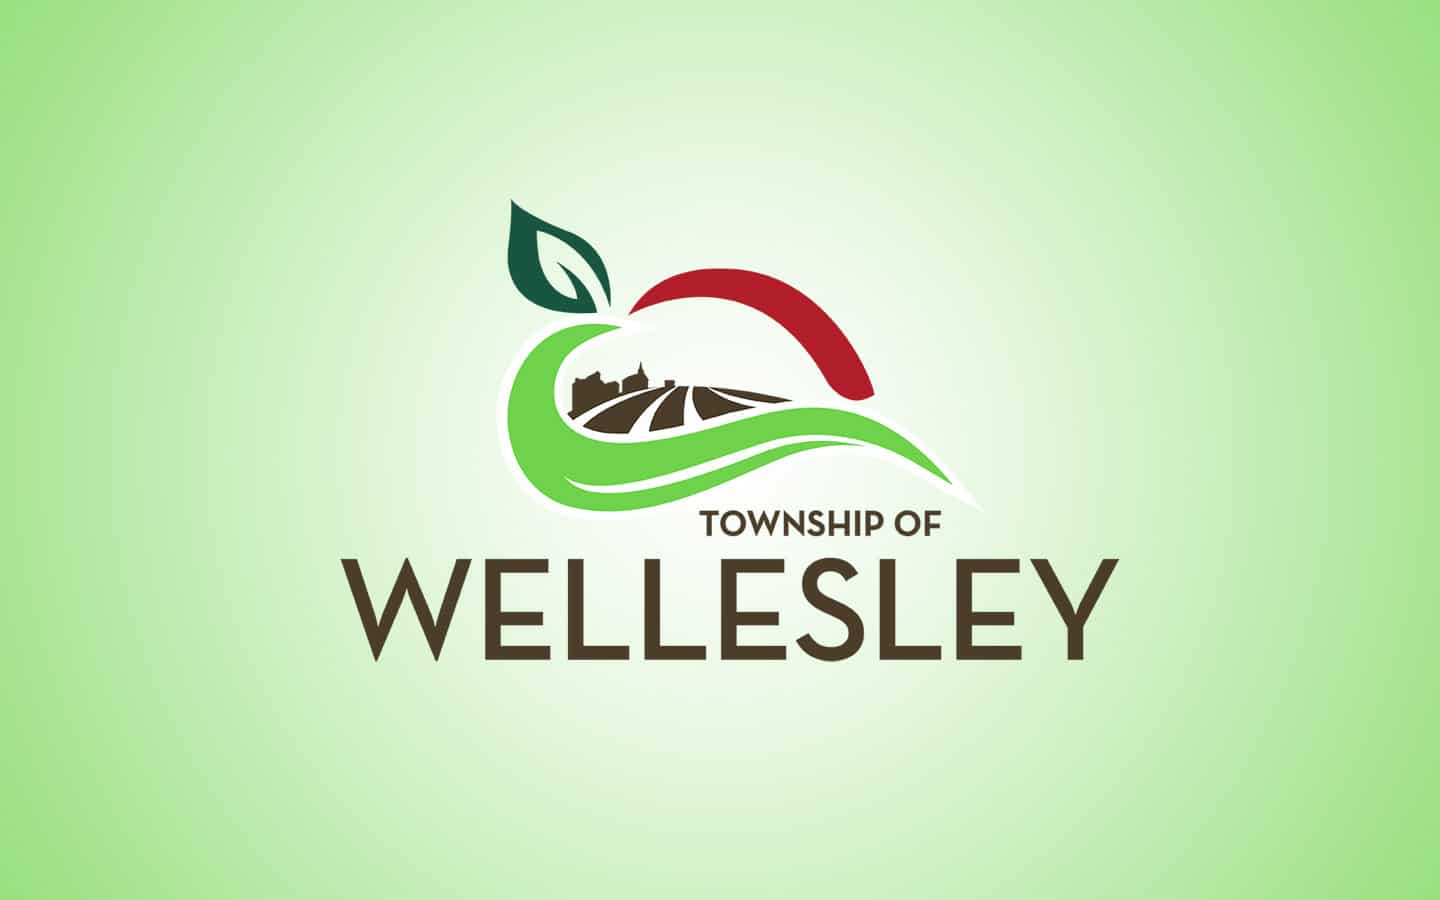                      Wellesley approves pilot project to allow food trucks                             
                     